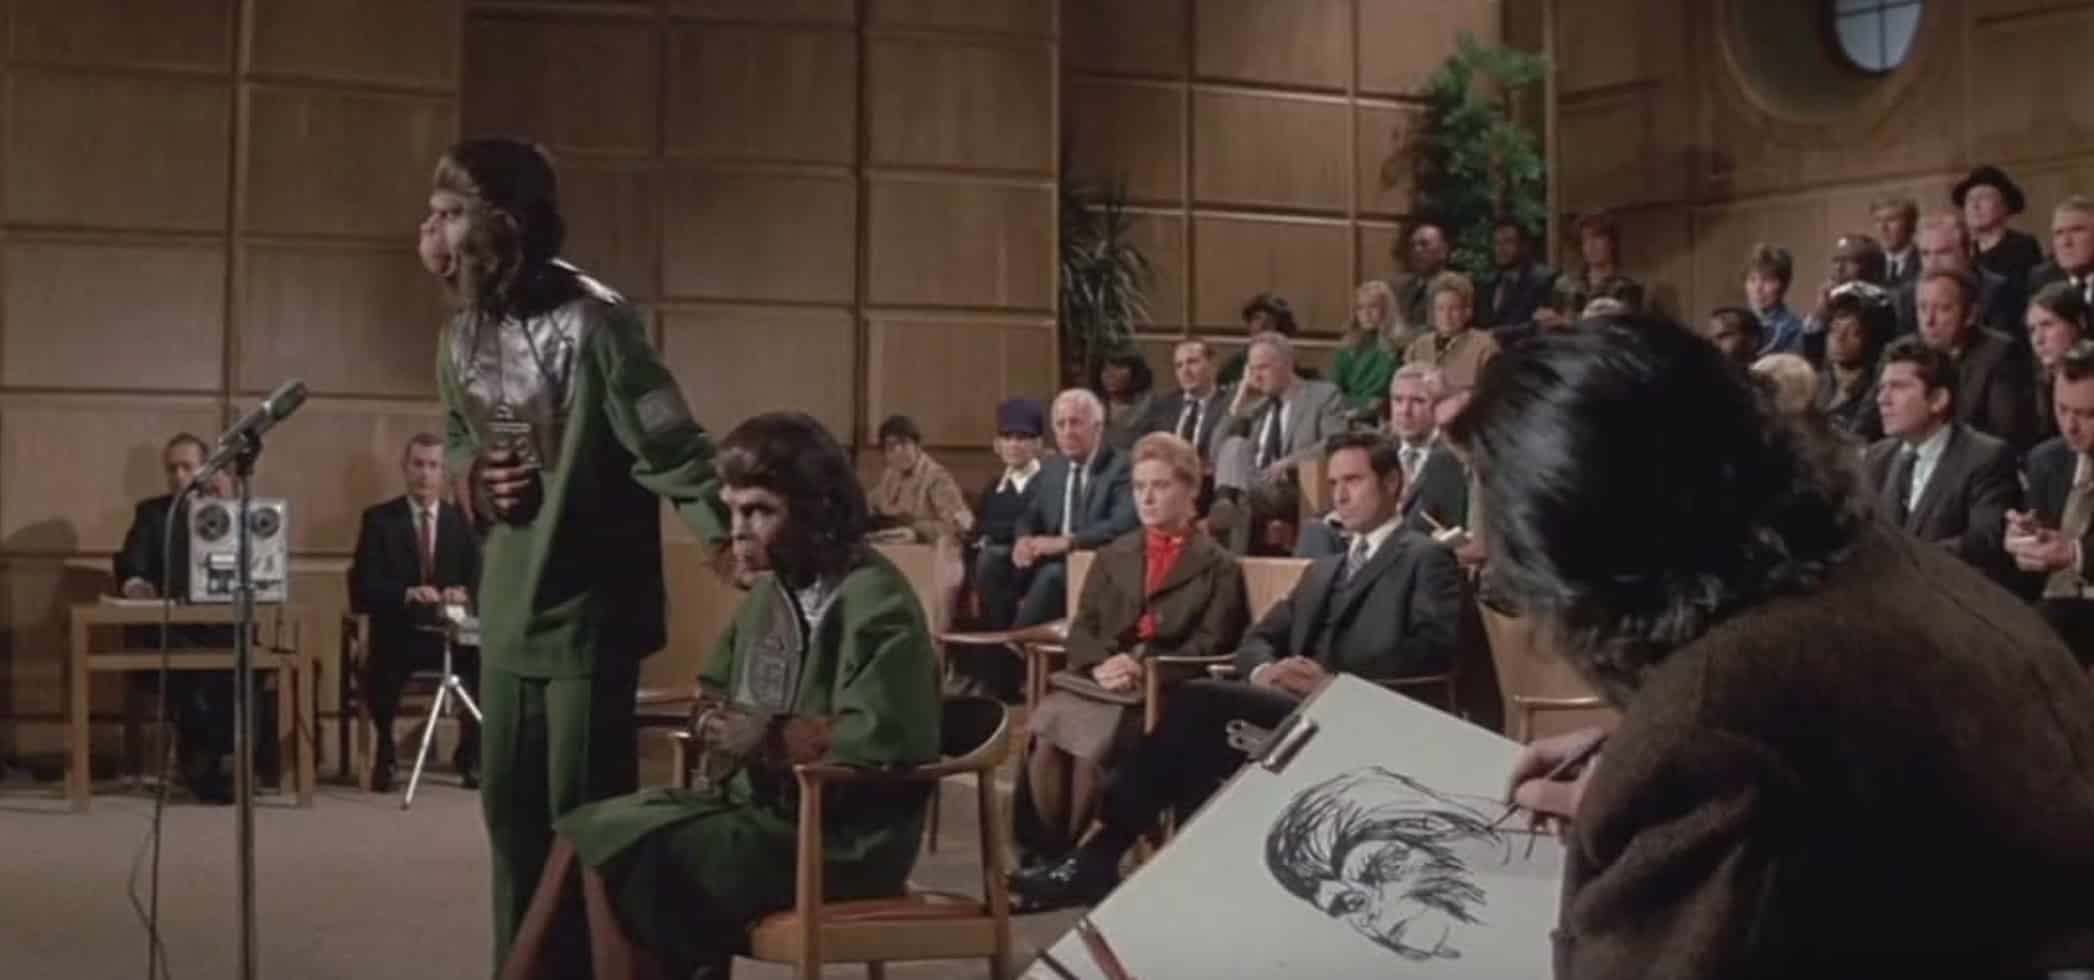 Two apes speak in a courtroom in this image from APJAC Productions.